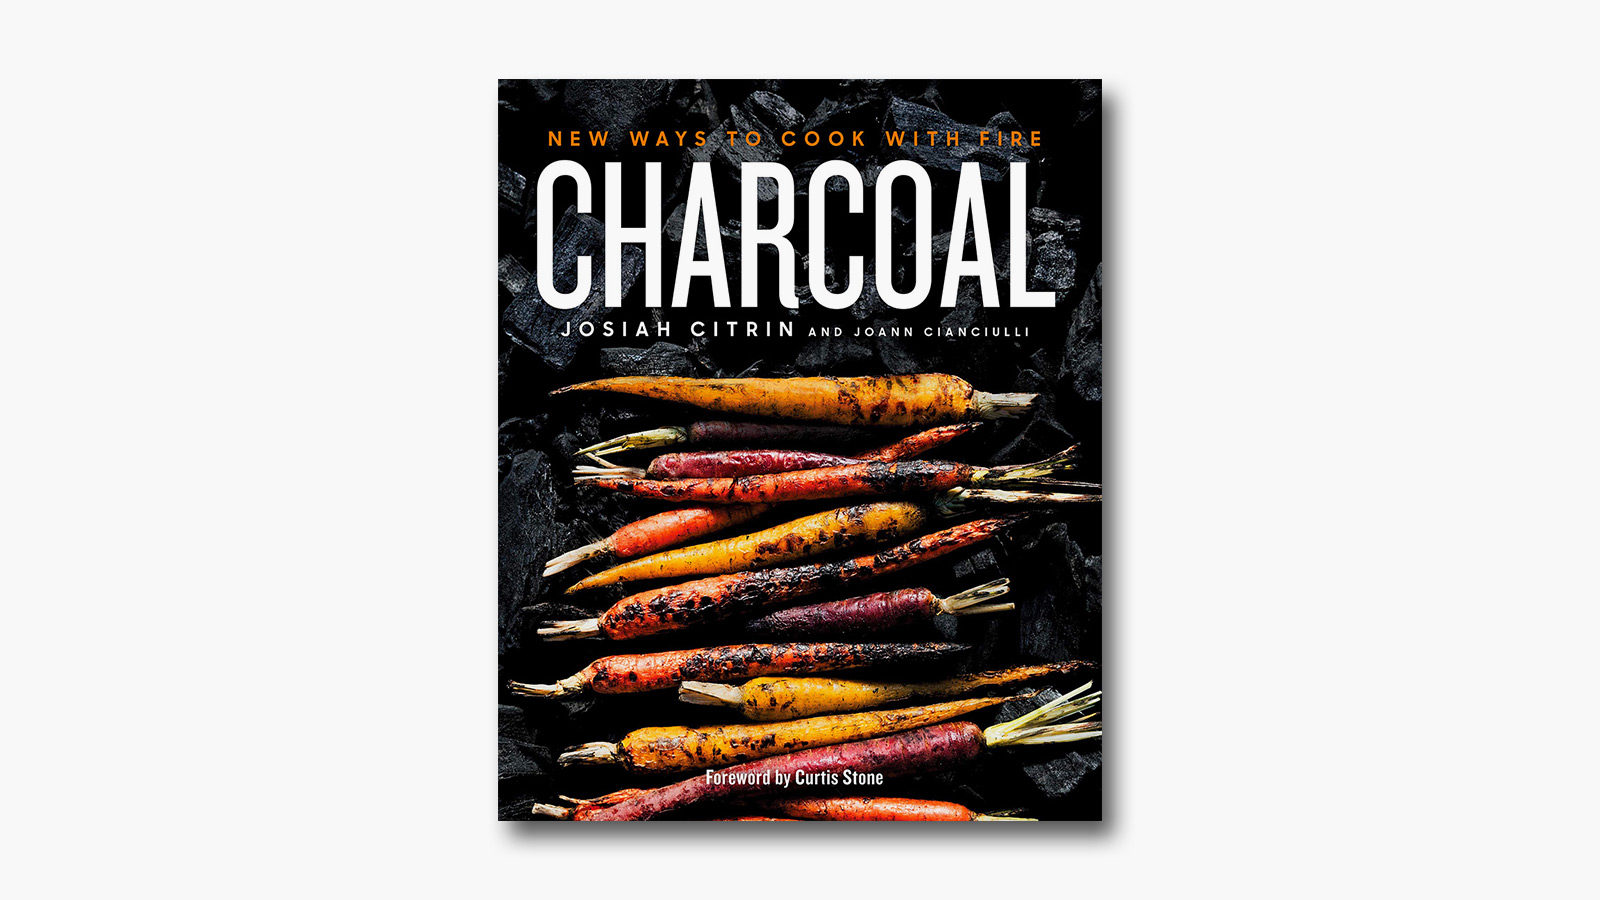 ‘Charcoal: New Ways to Cook with Fire’ by Josiah Citrin & Joann Cianciulli